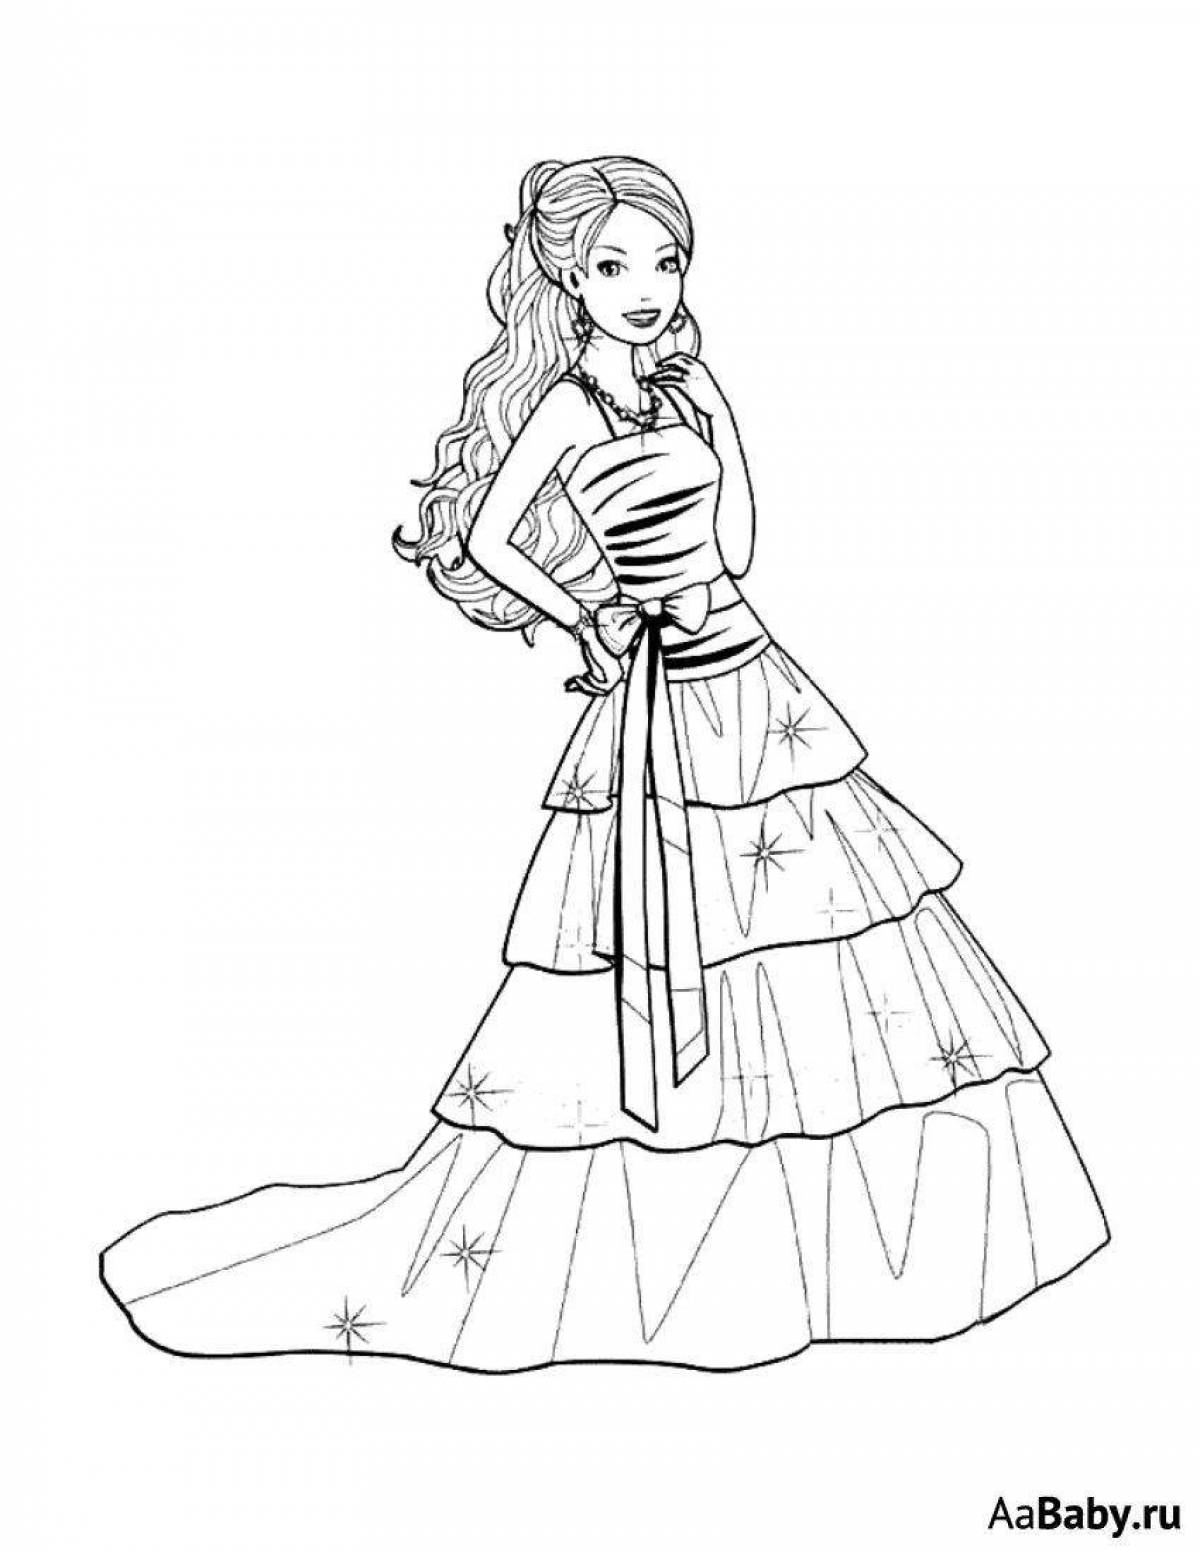 Playful coloring of barbie in a fluffy dress